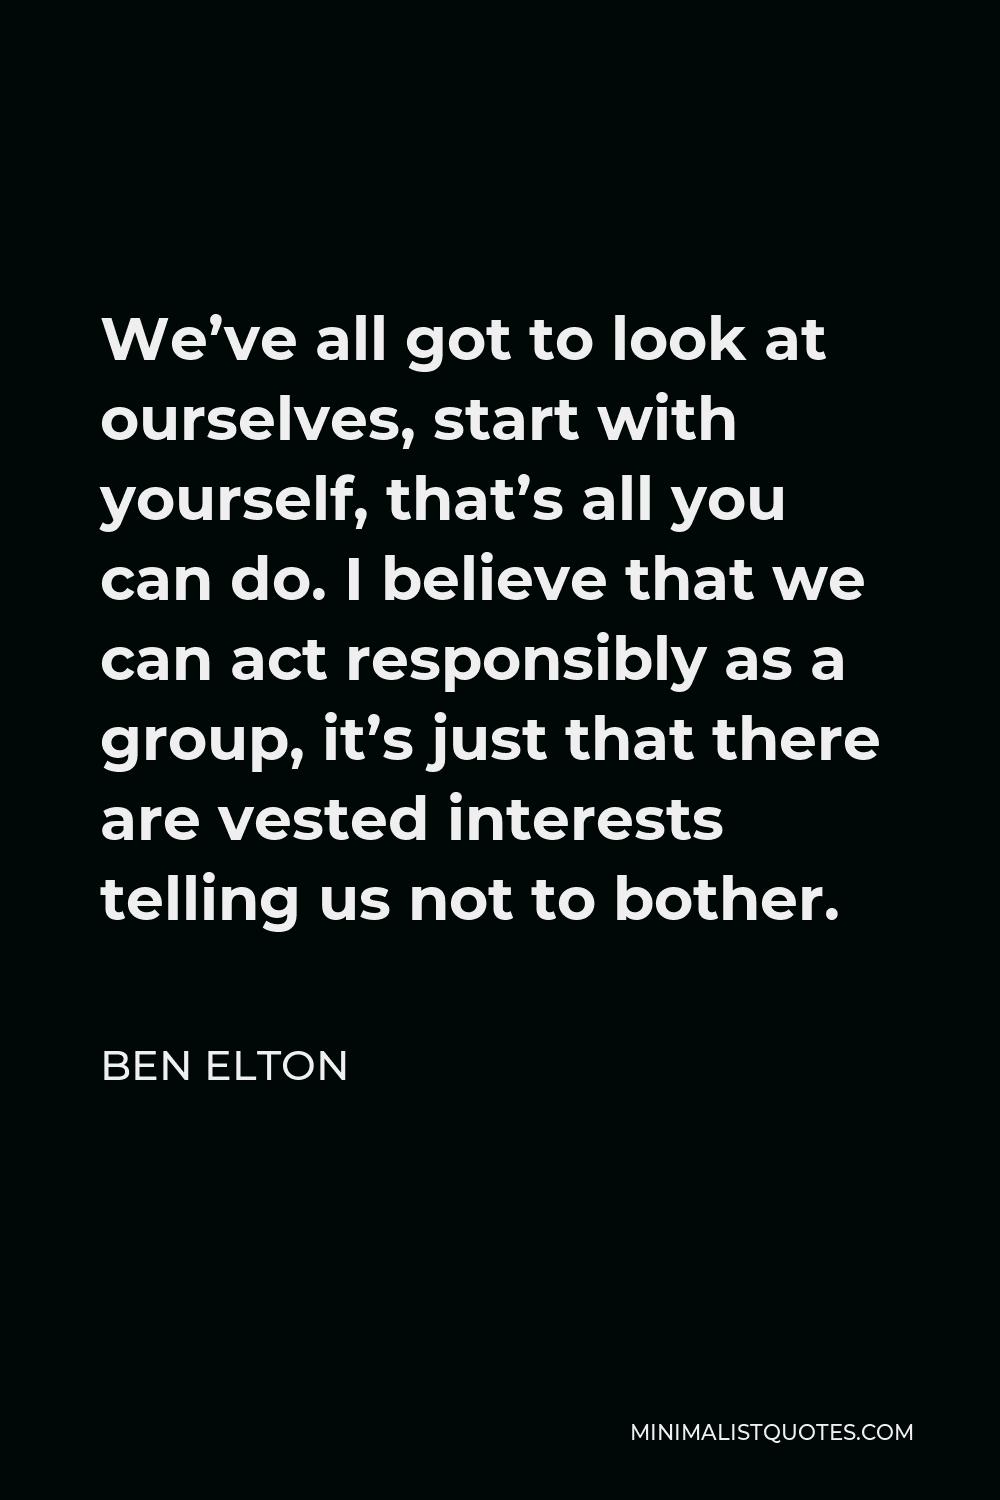 Ben Elton Quote - We’ve all got to look at ourselves, start with yourself, that’s all you can do. I believe that we can act responsibly as a group, it’s just that there are vested interests telling us not to bother.